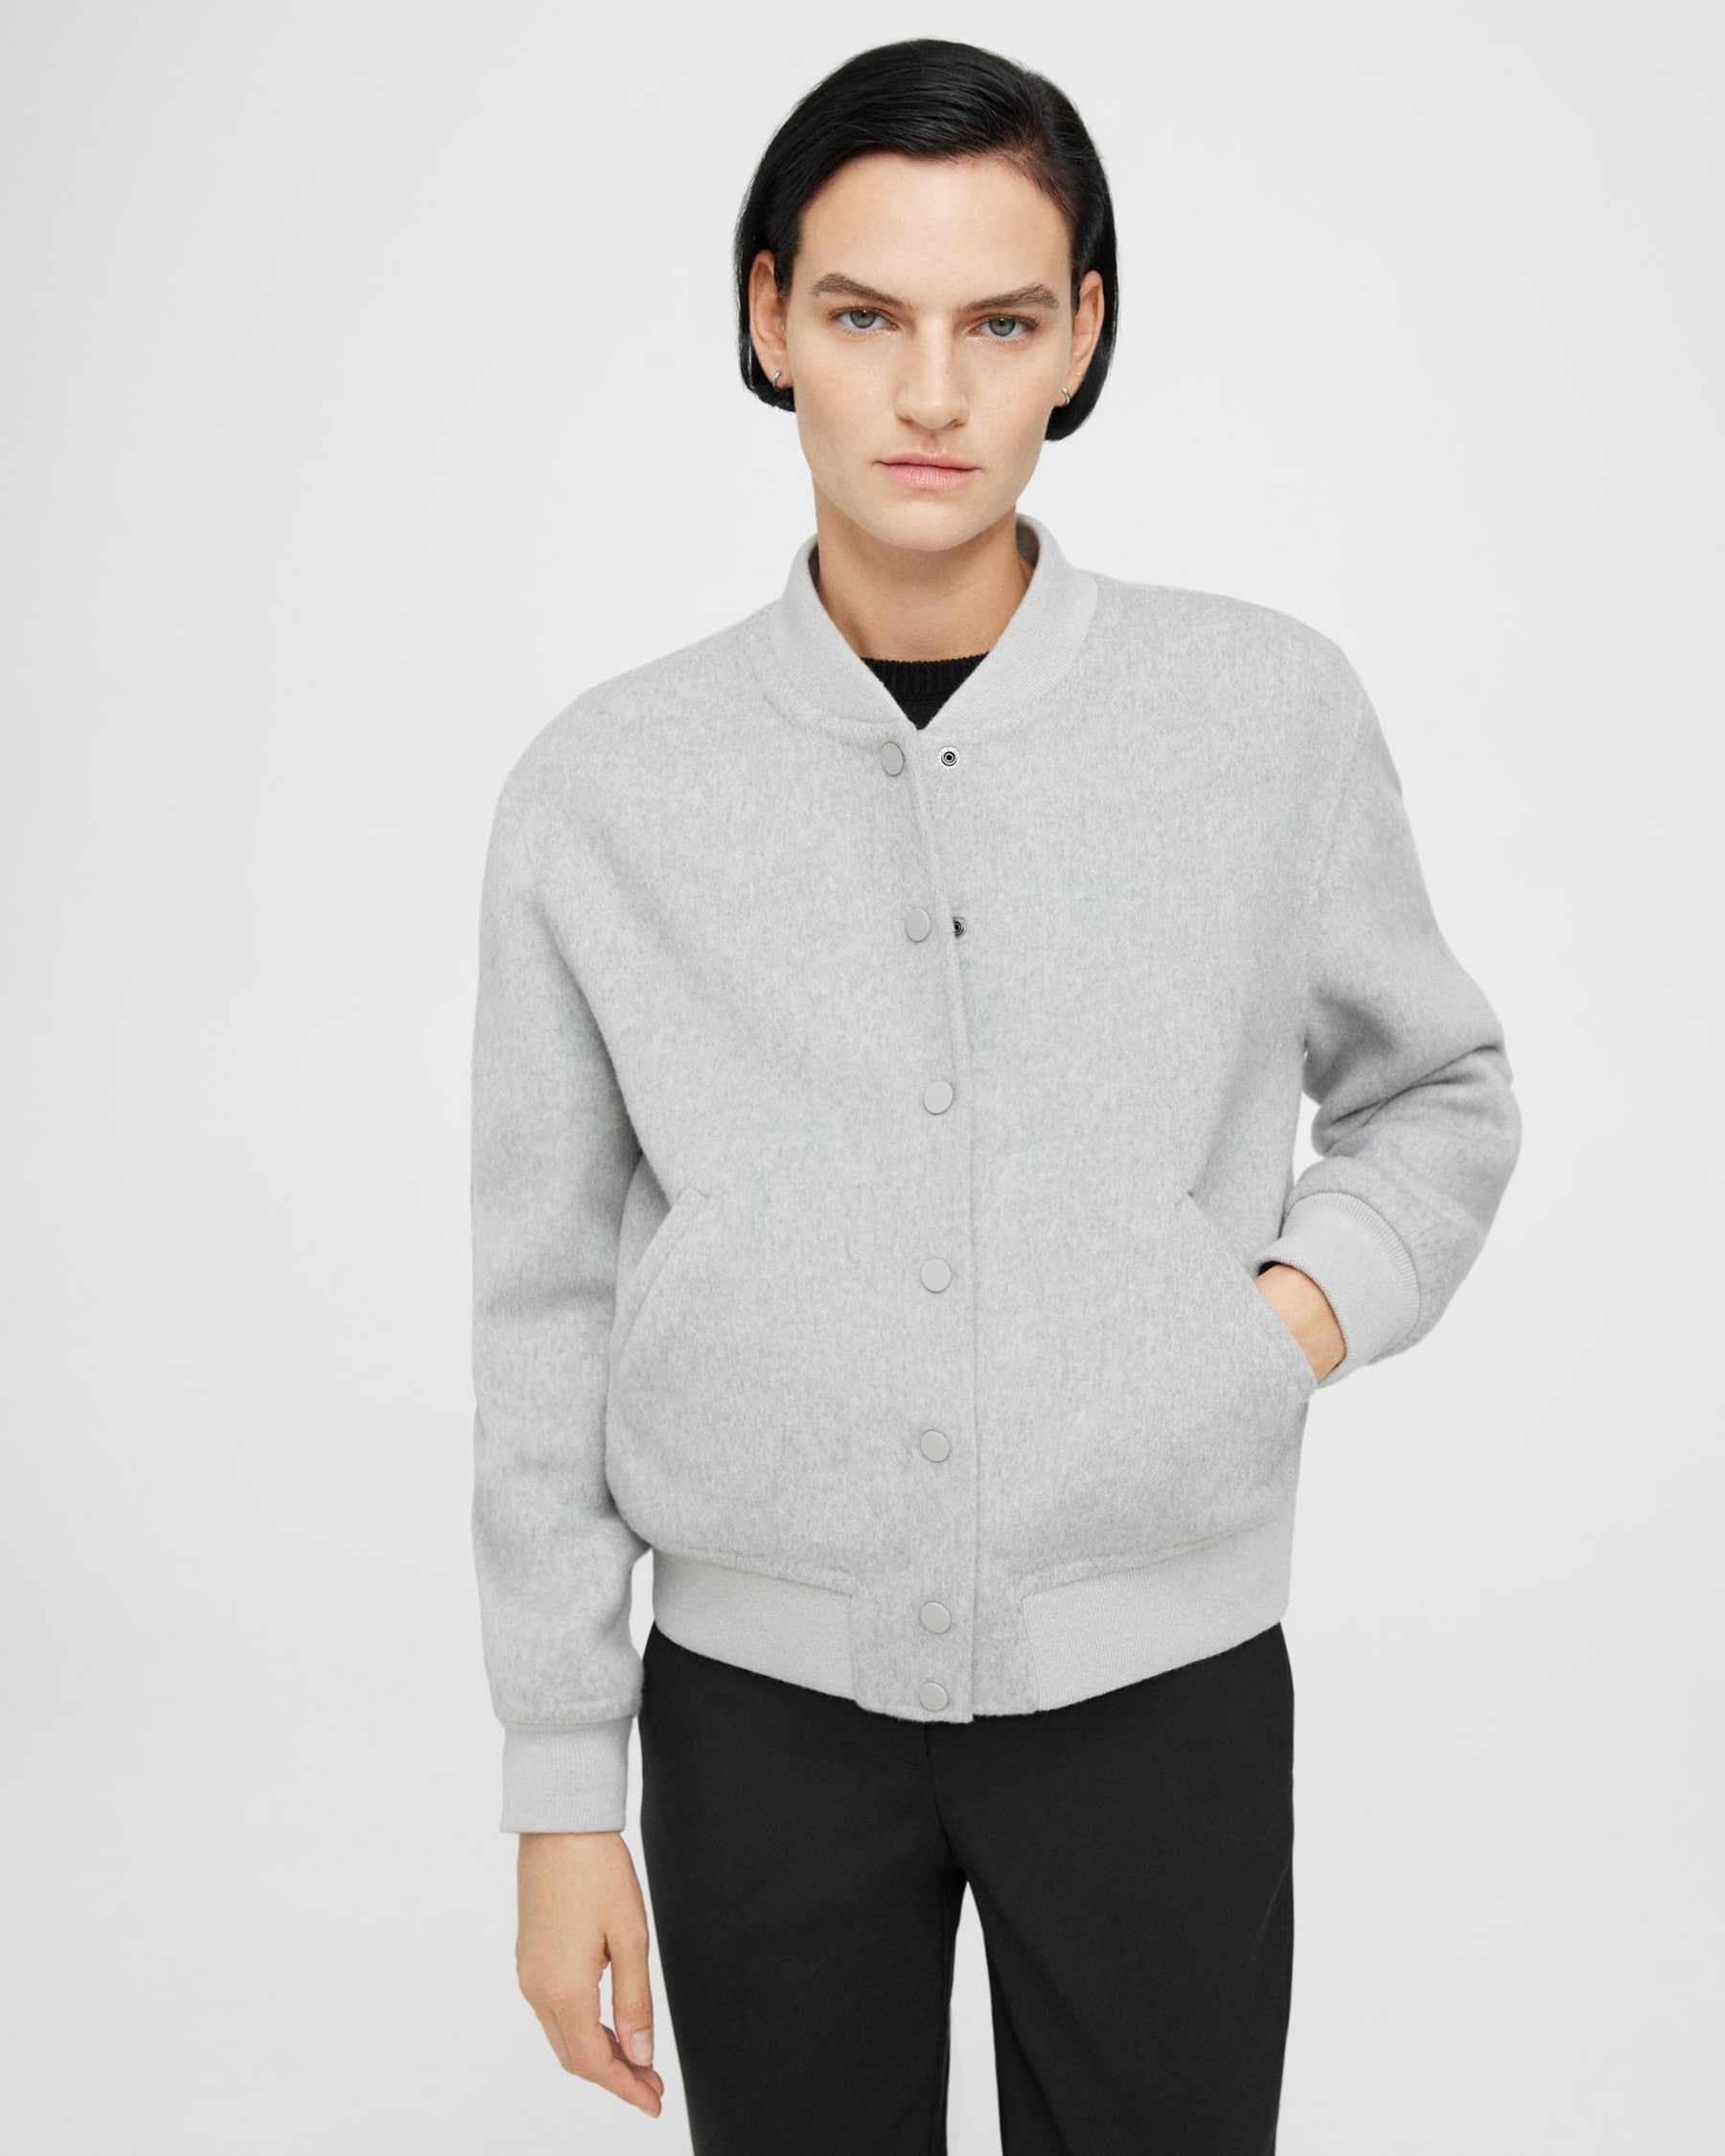 Theory Varsity Jacket in Double-Face Wool-Cashmere